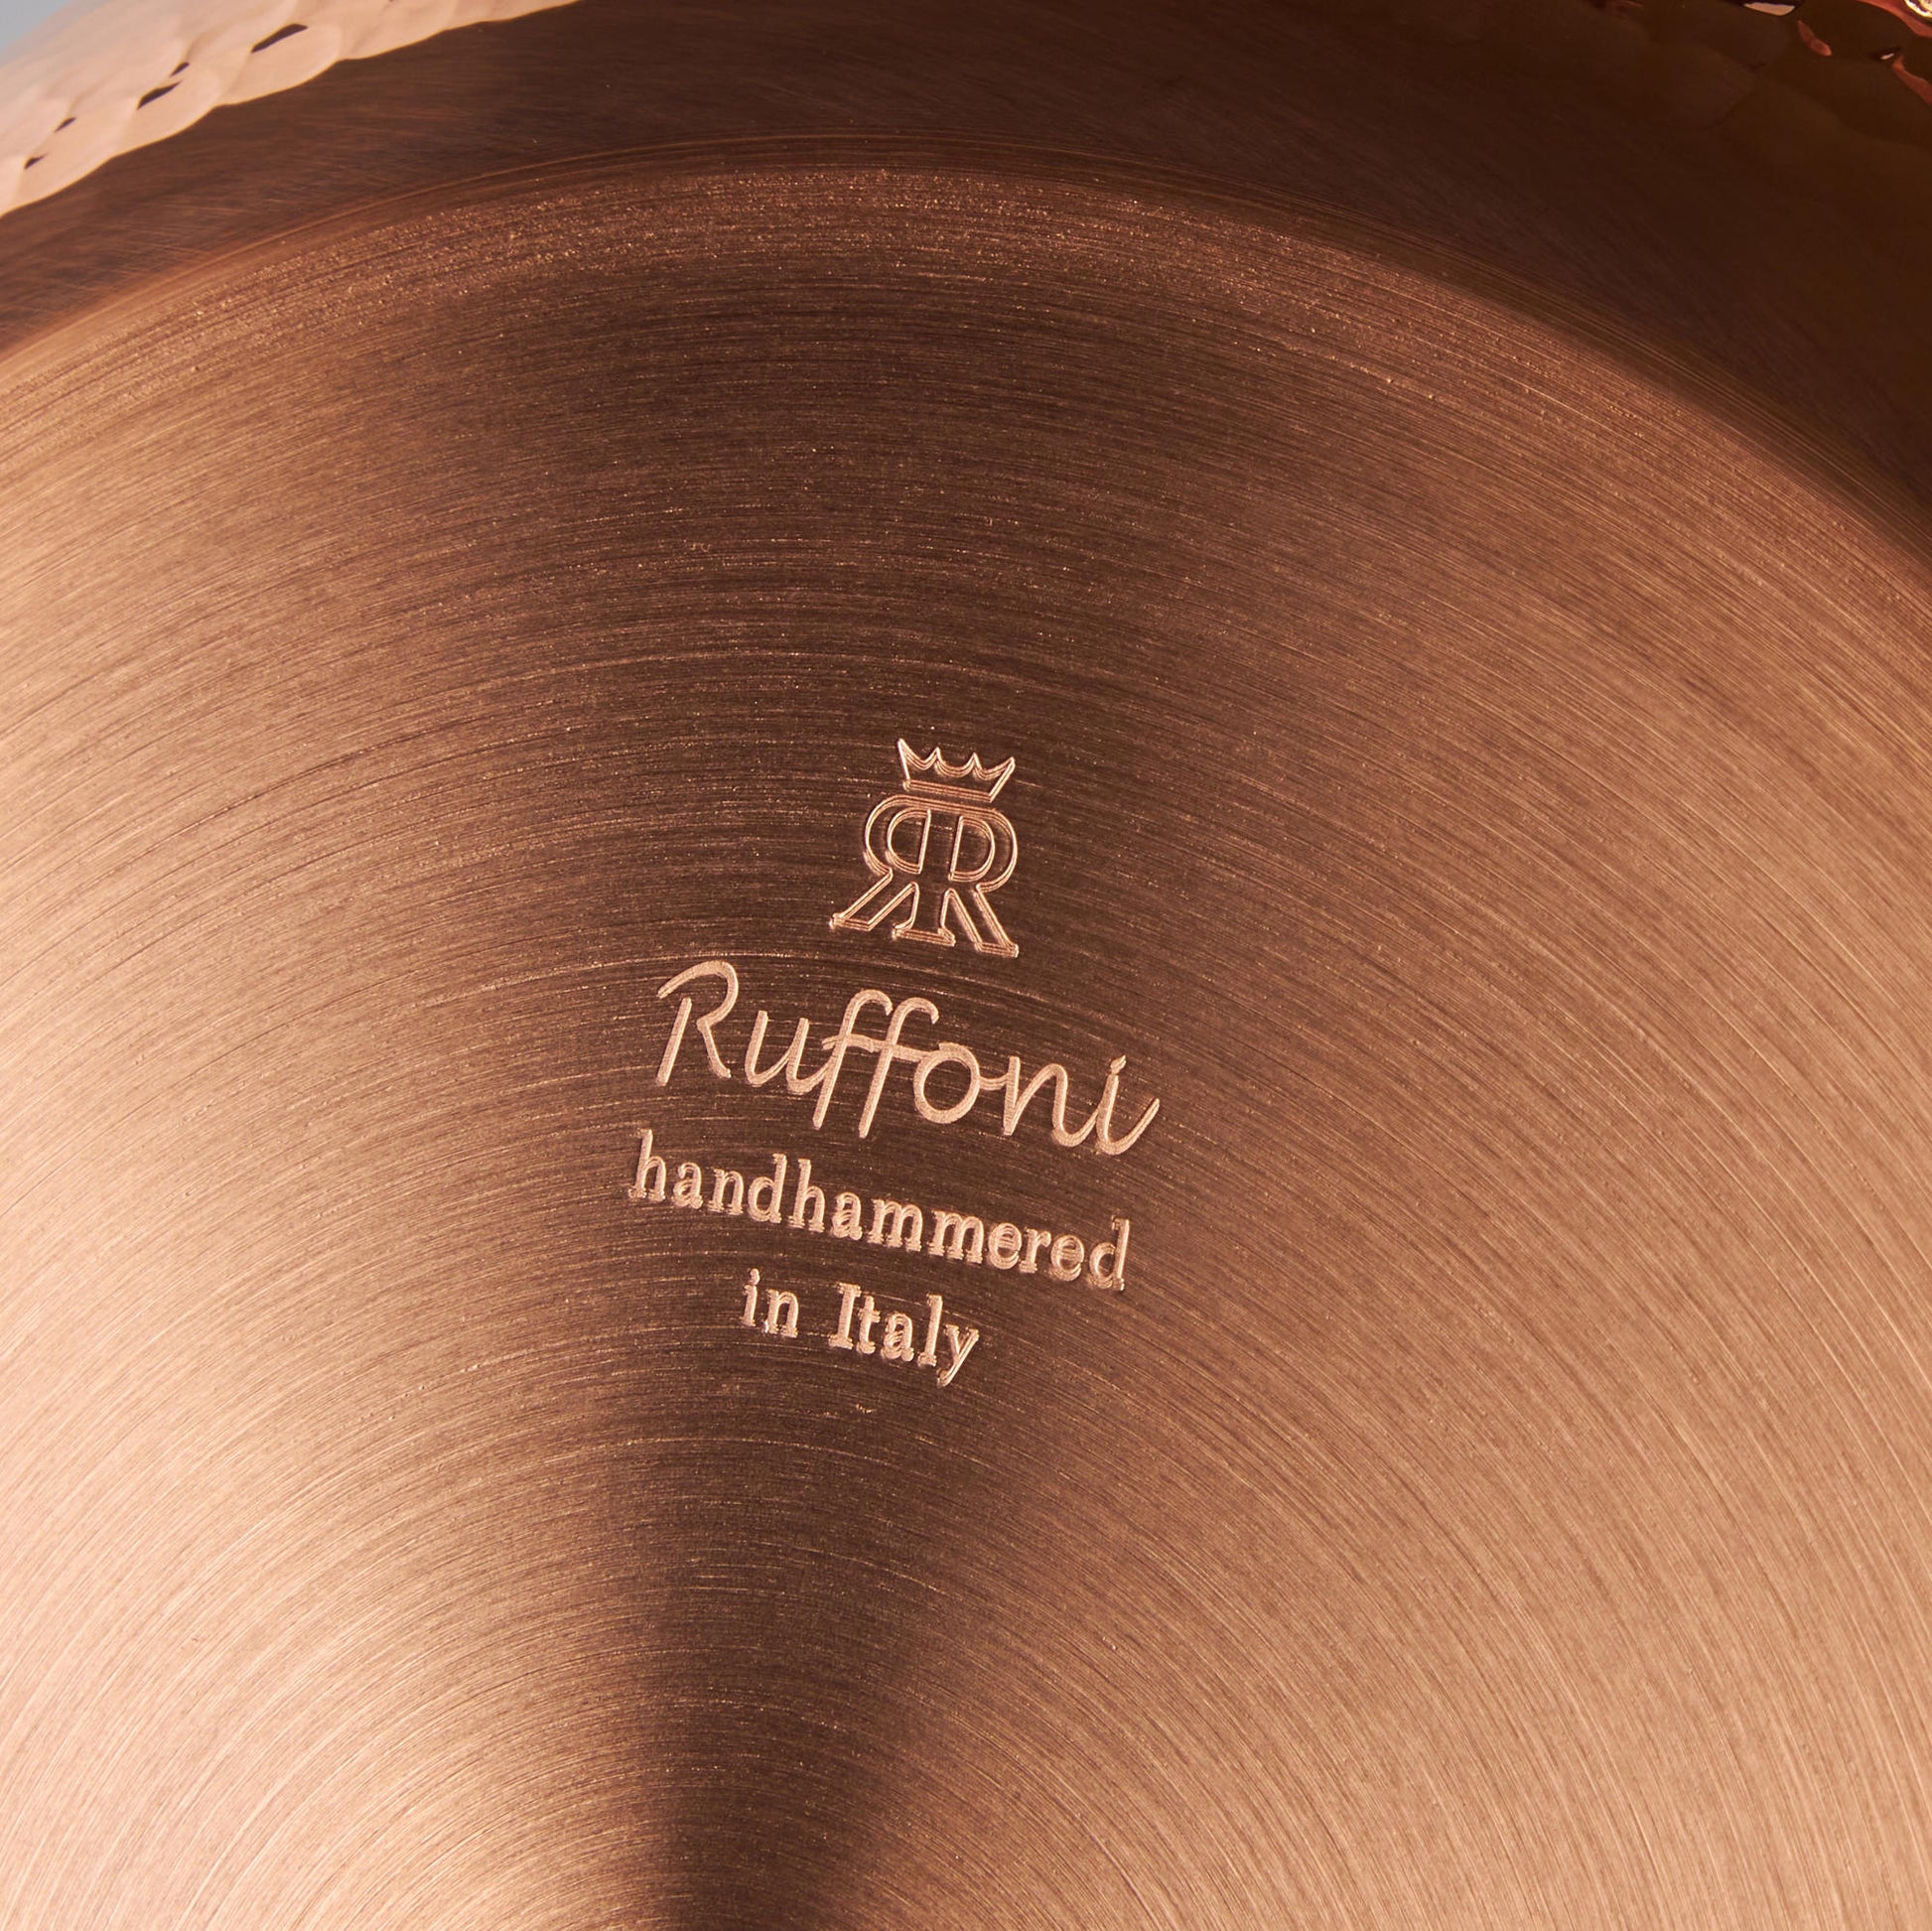 Ruffoni Made in Italy brand logo stamped under Opus Cupra copper 4 qt chef's pan for authenticity